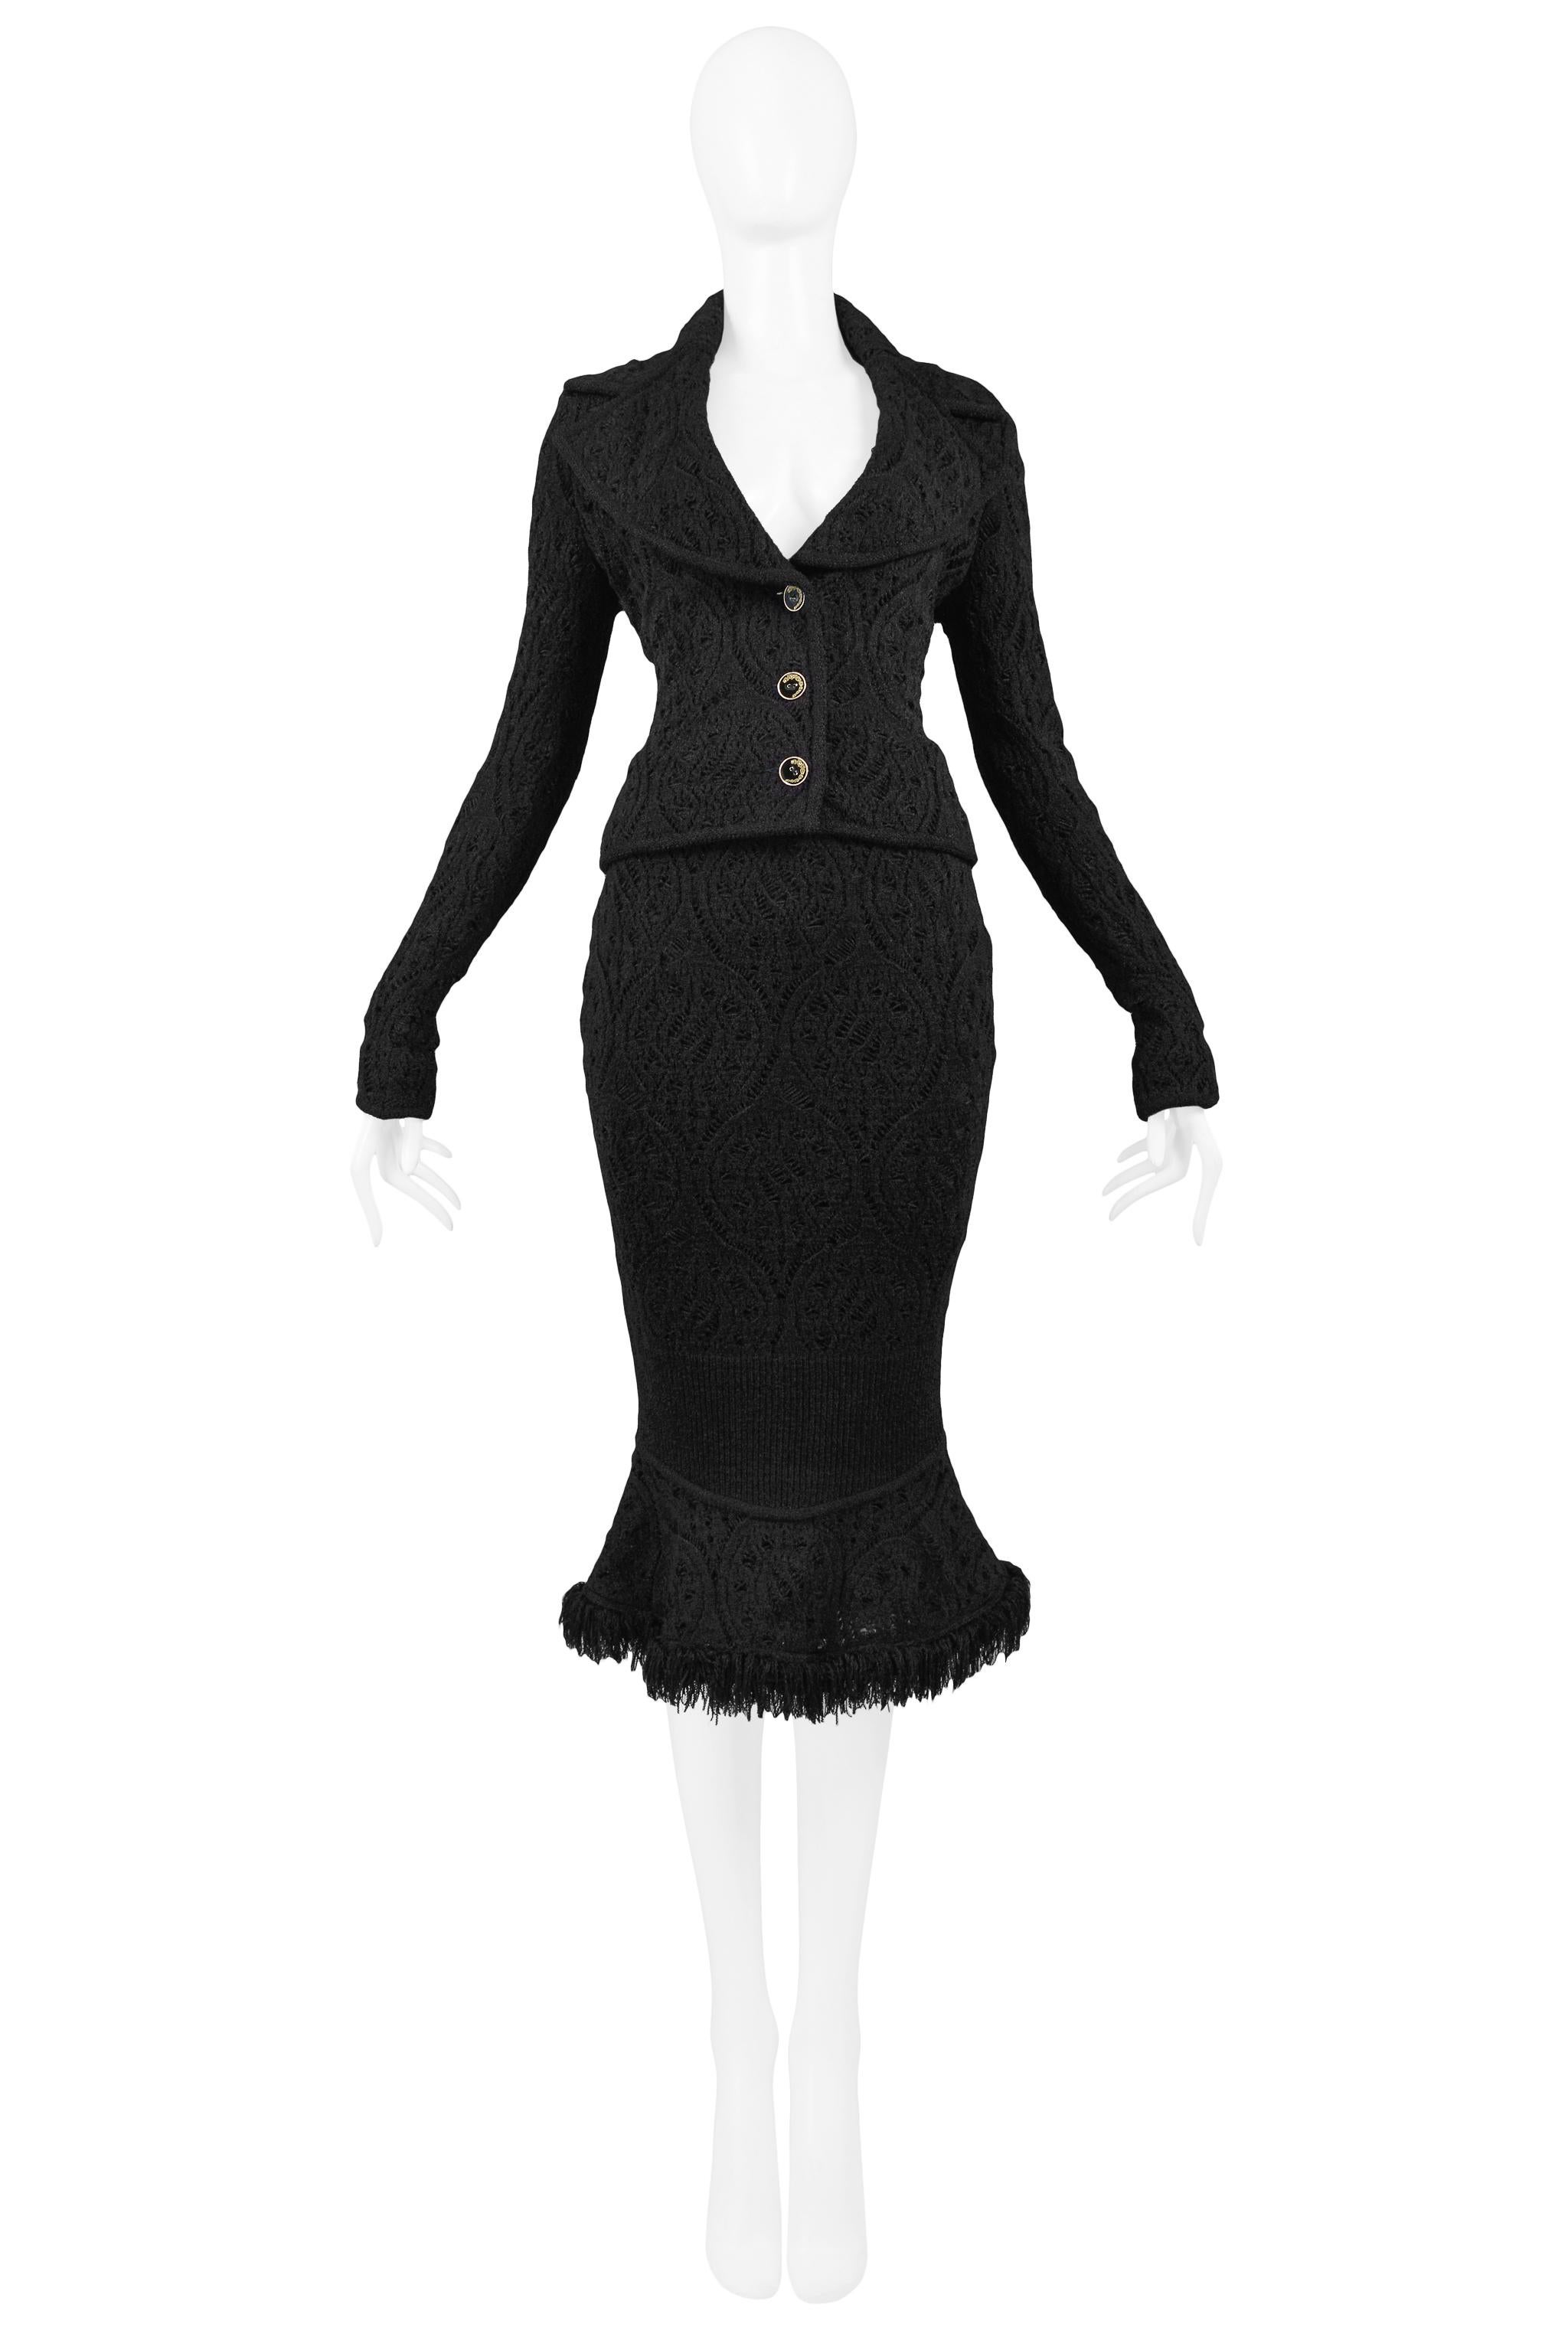 Vintage John Galliano black crochet skirt suit. The jacket features a deep neckline, large notched collar, and three-button closure at center front, and the skirt has a fitted silhouette with a flared fringe hem. Circa 1999.

Excellent Vintage